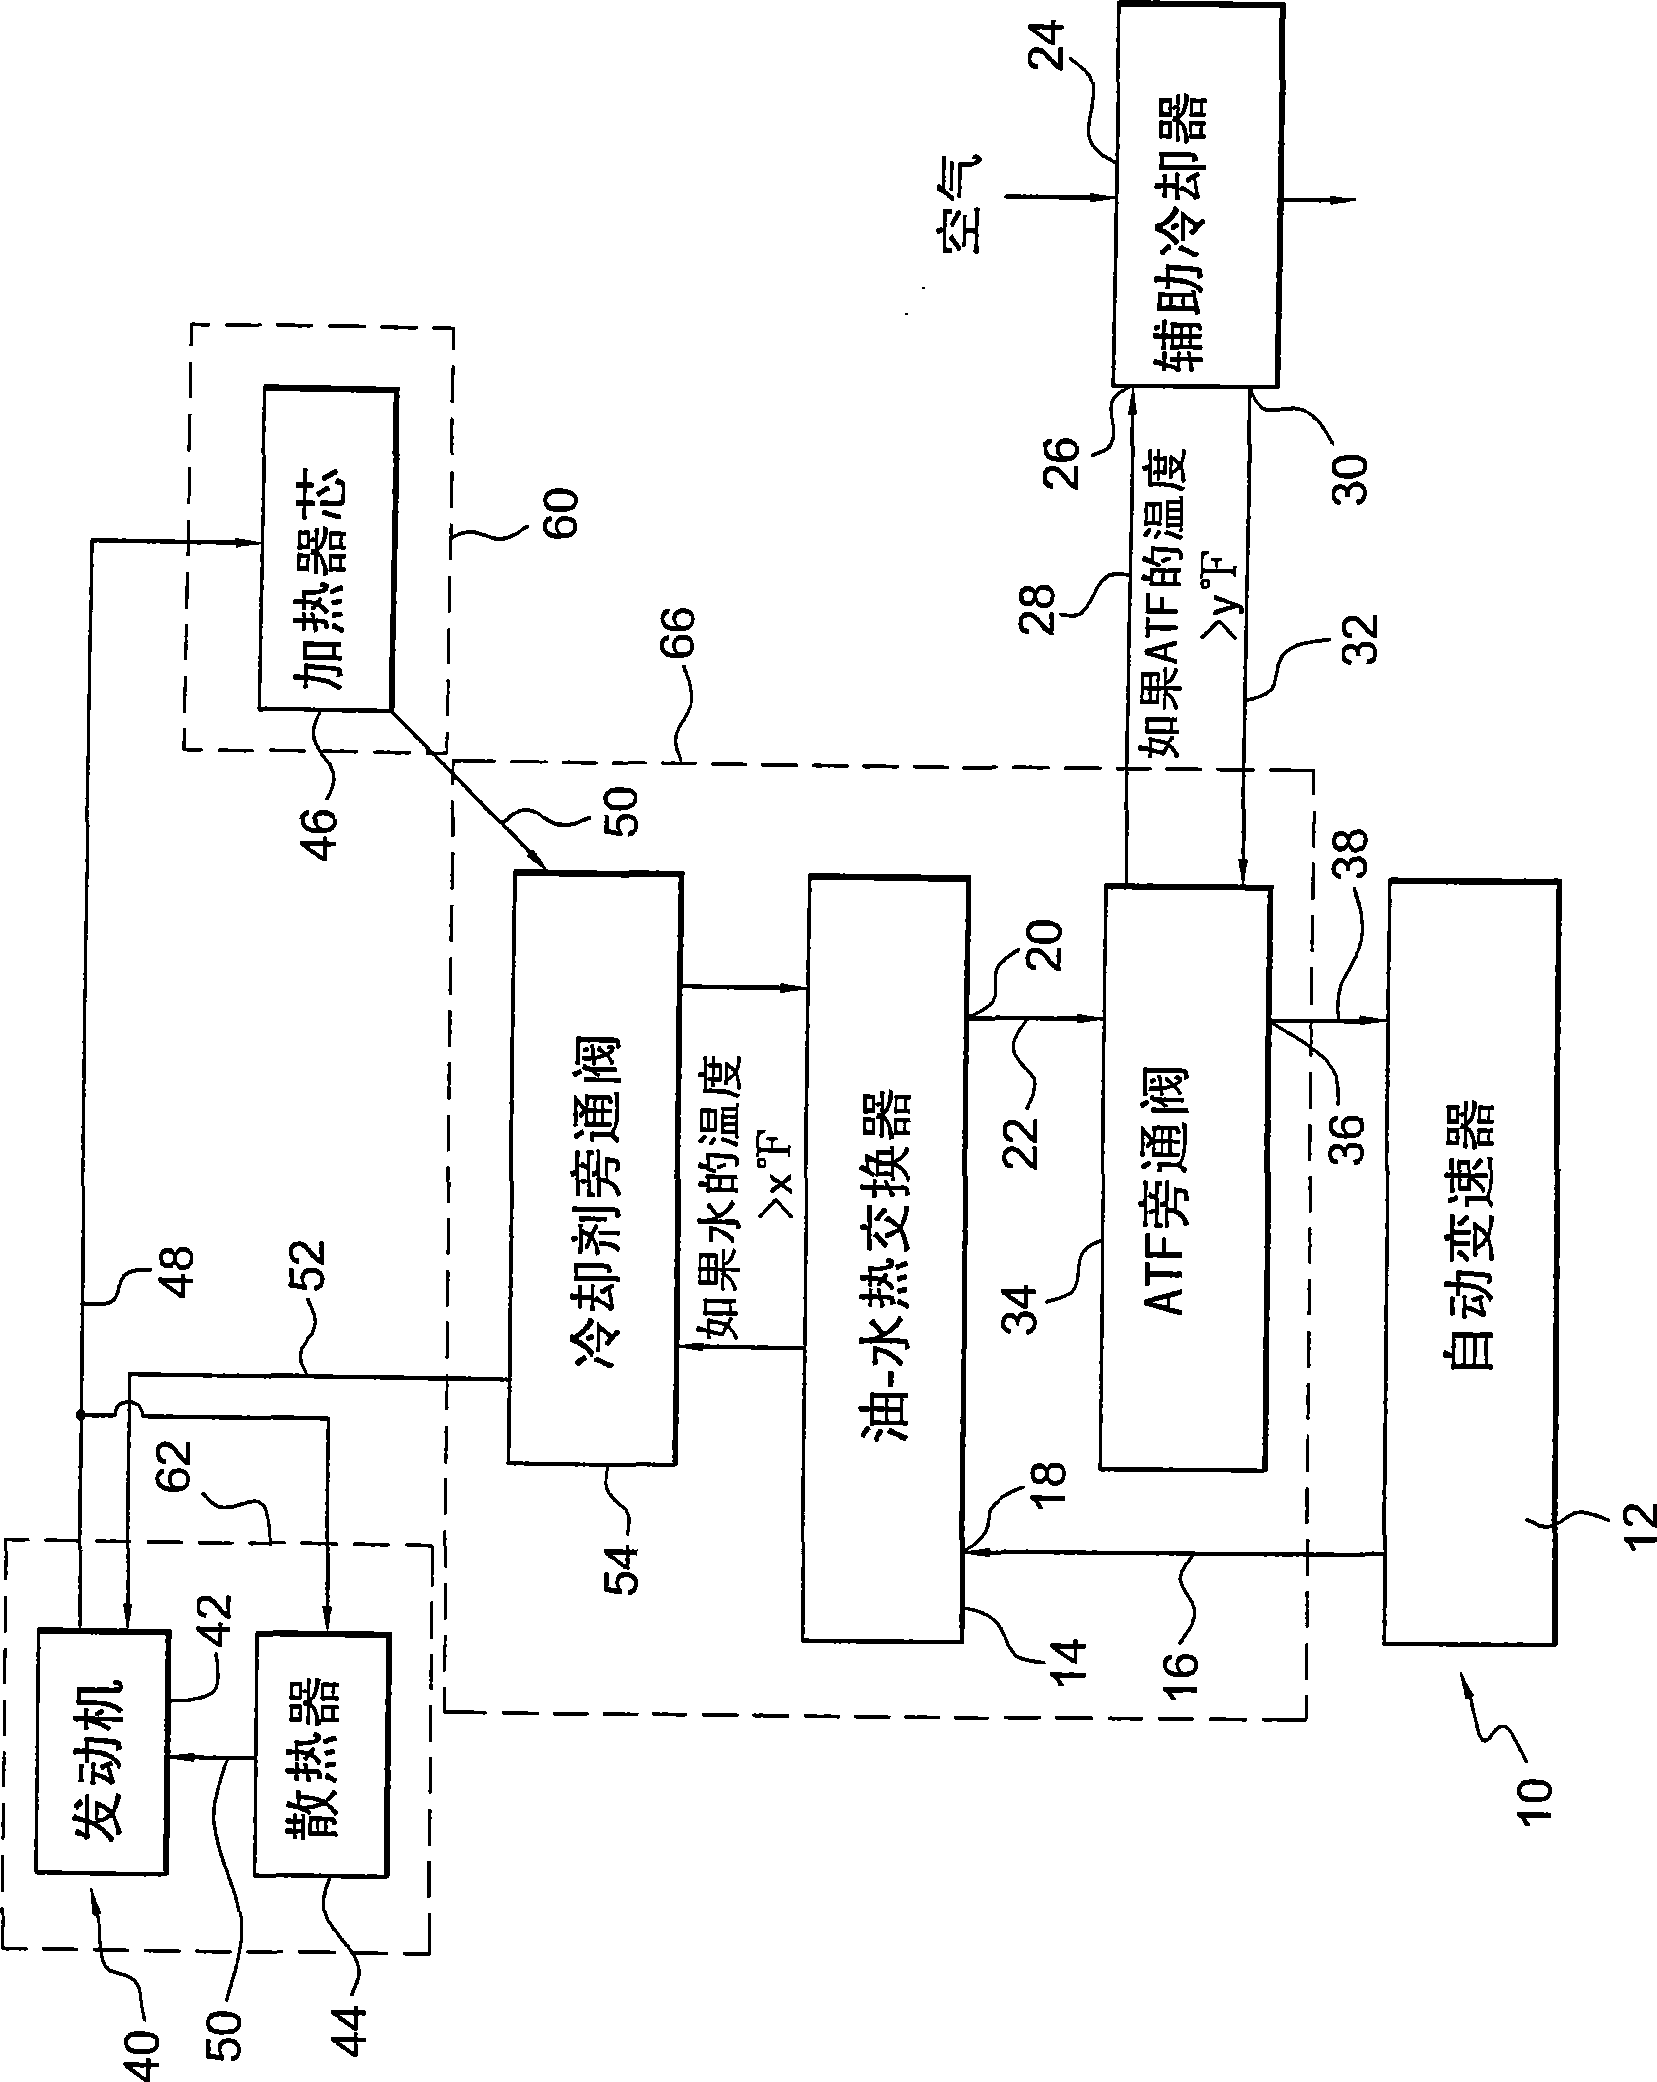 Regulating transmission fluid and engine coolant temperatures in a motor vehicle